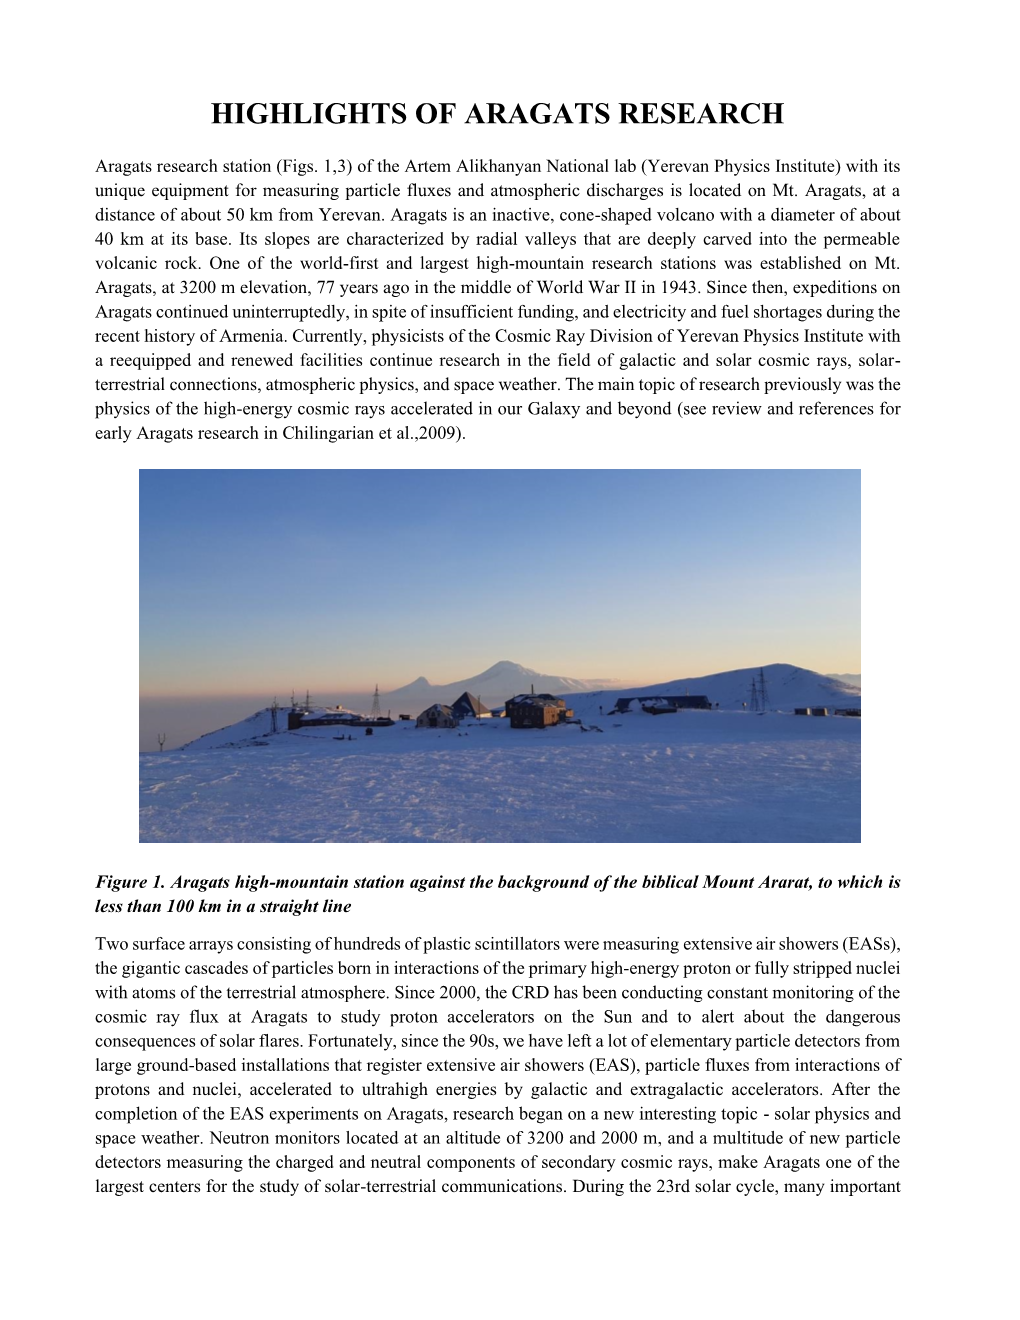 Highlights of Aragats Research